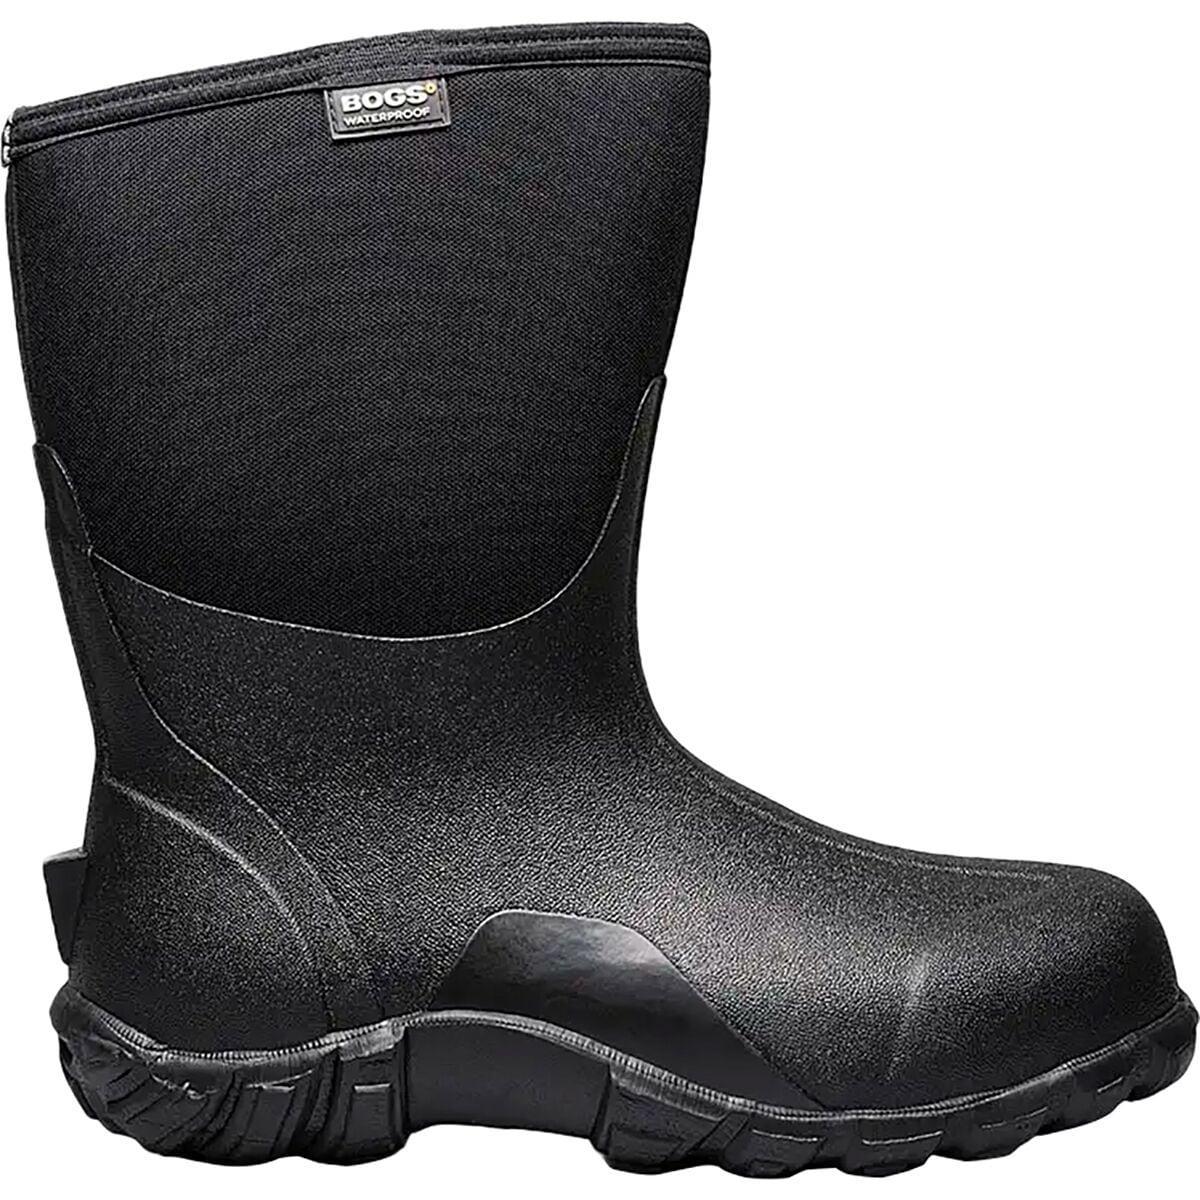 Bogs Classic Mid Waterproof Insulated Work Boot Product Image